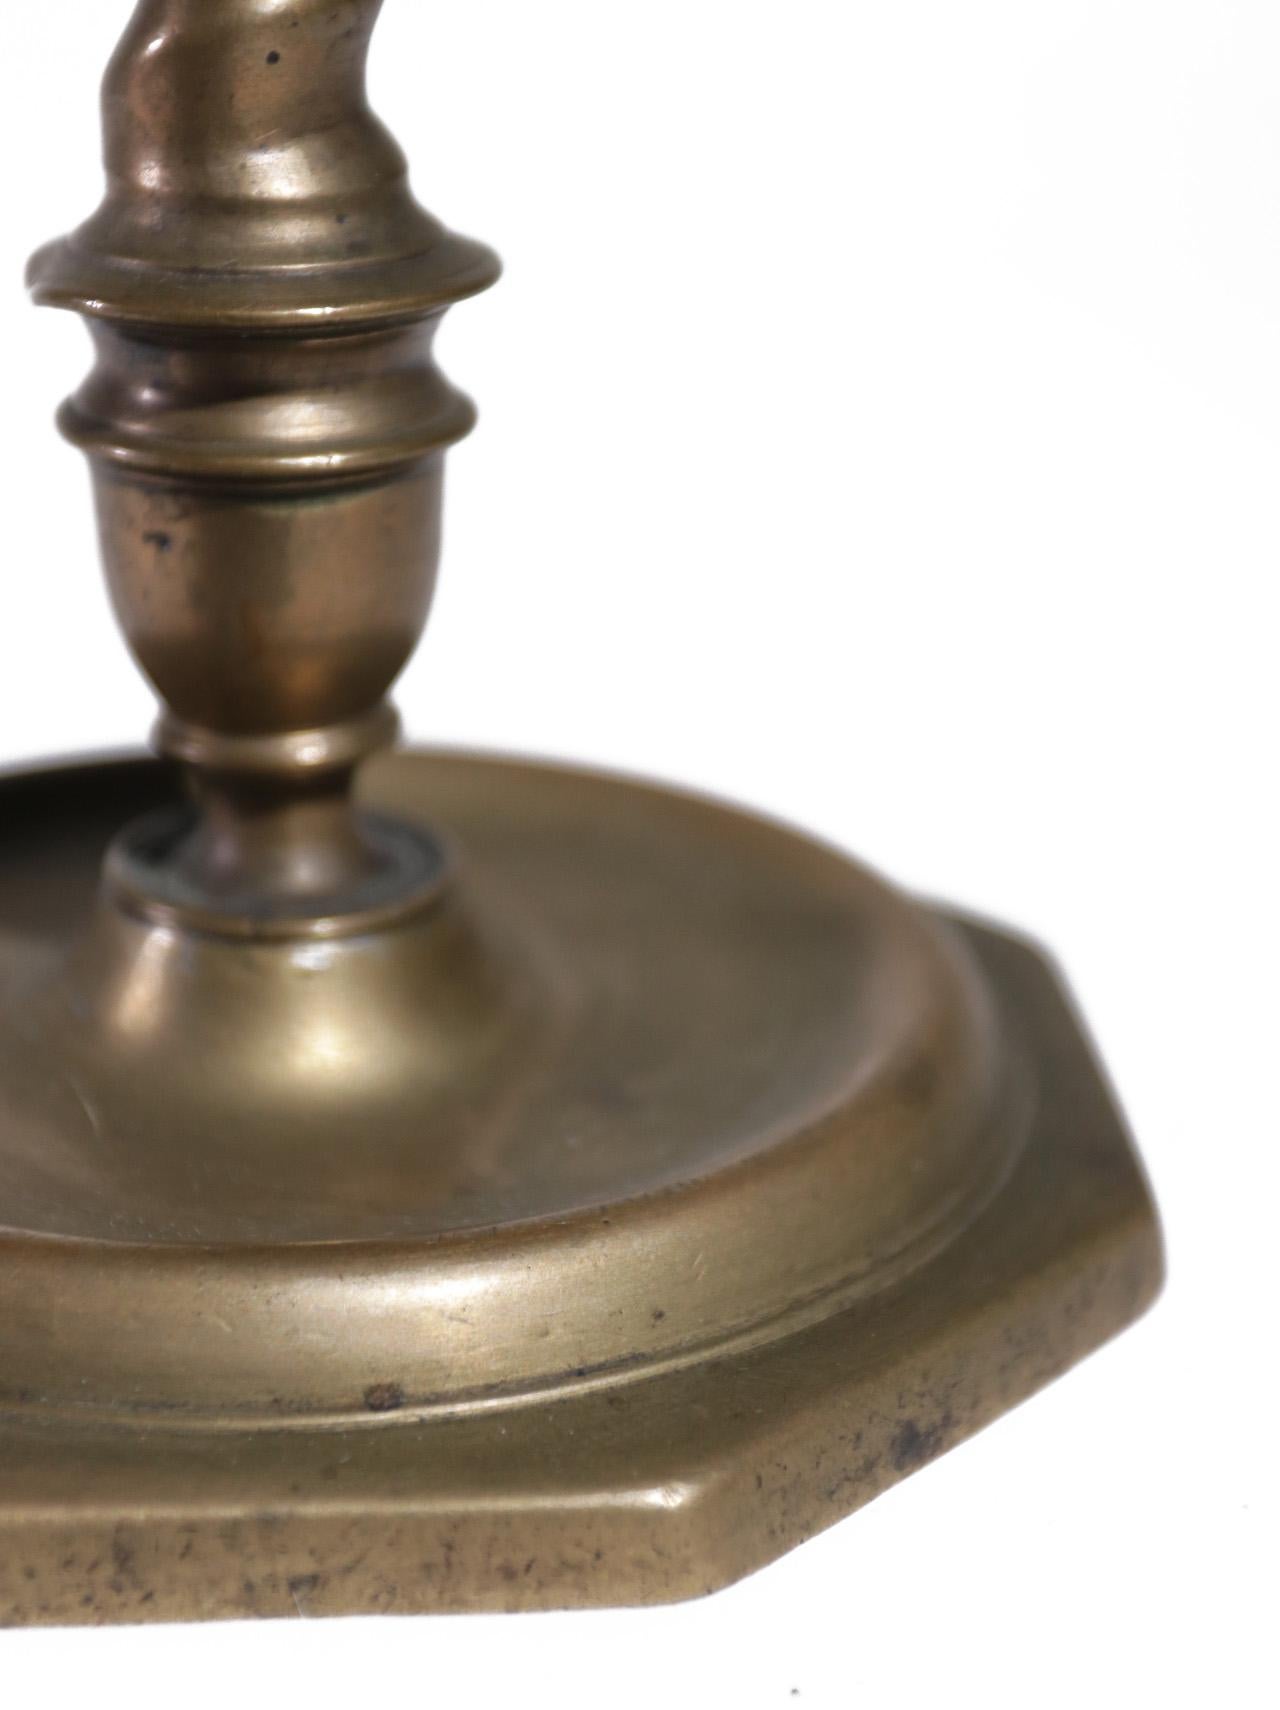 Baroque 17th Century Bronze Candlestick with a Barley Twist Spanish